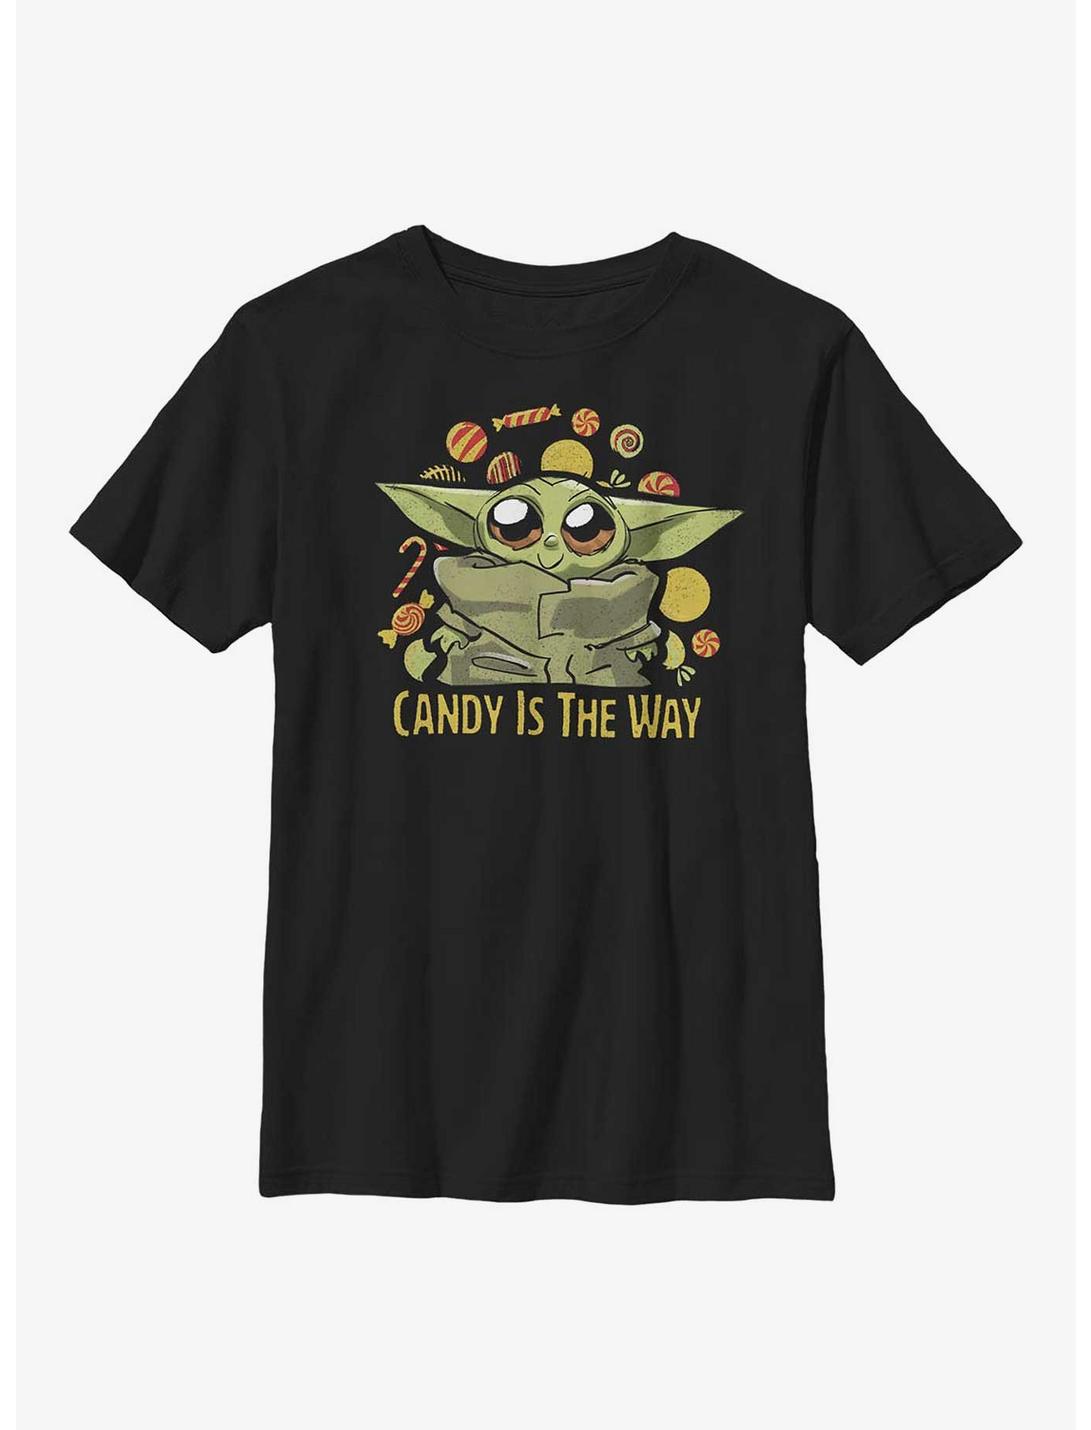 Star Wars The Mandalorian Candy Is The Way Youth T-Shirt, BLACK, hi-res